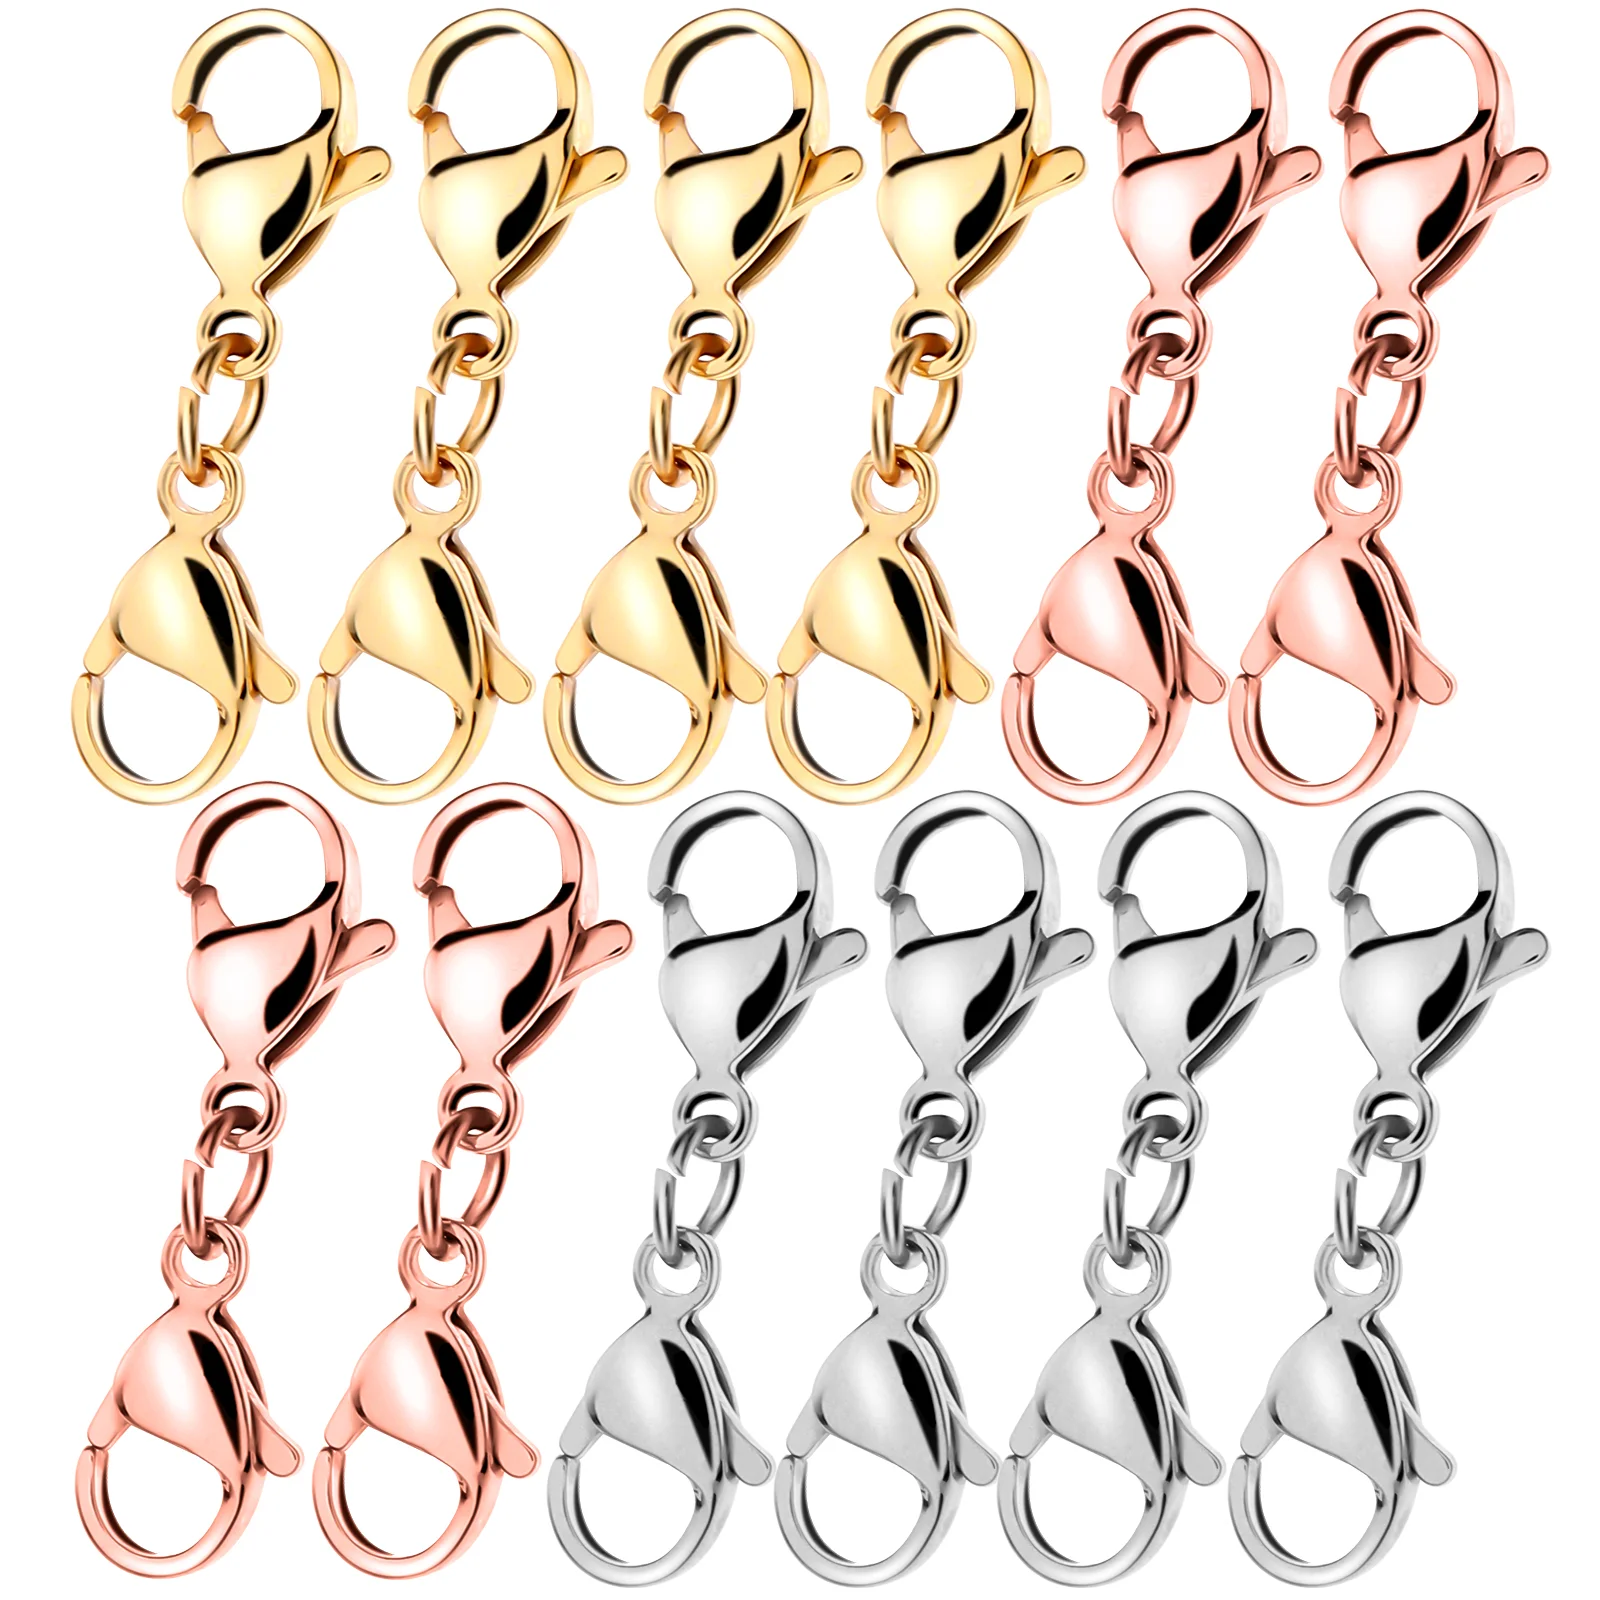 

12 Pcs Lobster Clasp Bracelets Bulk Jewellery Clasps Connector Jewelry Making Fasteners Metal Necklace Layering